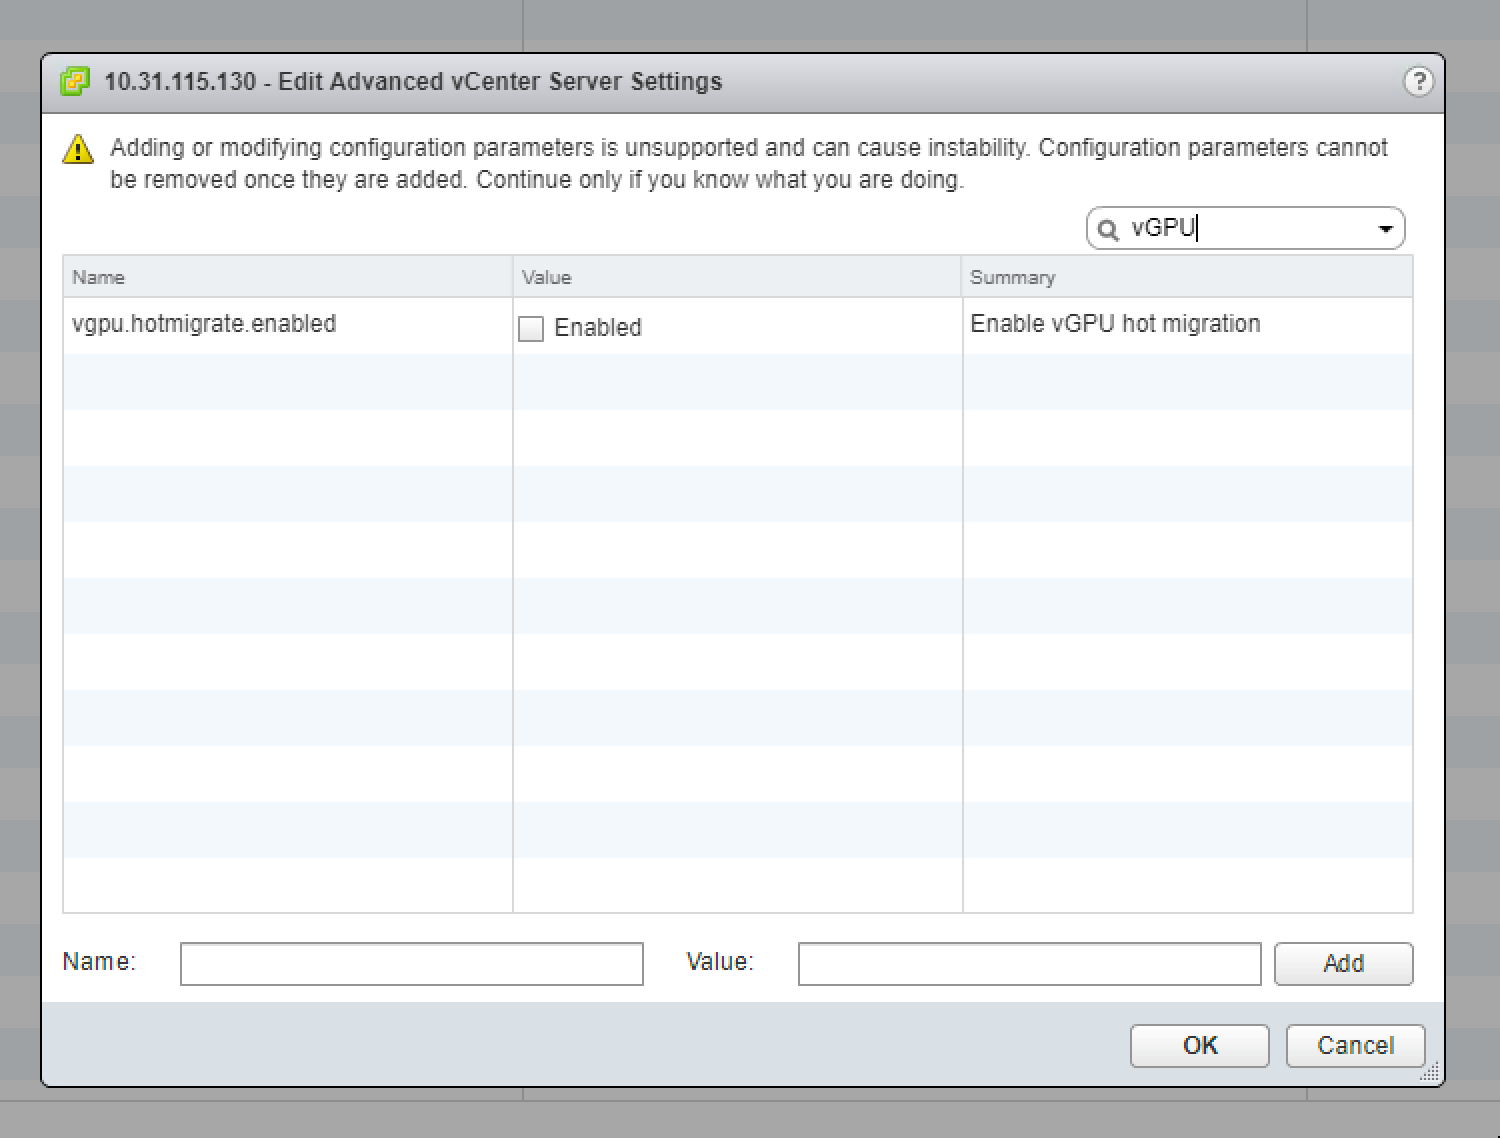 Screen capture showing the vgpu.hotmigrate.enabled setting in the Edit Advanced vCenter Server Settings window.